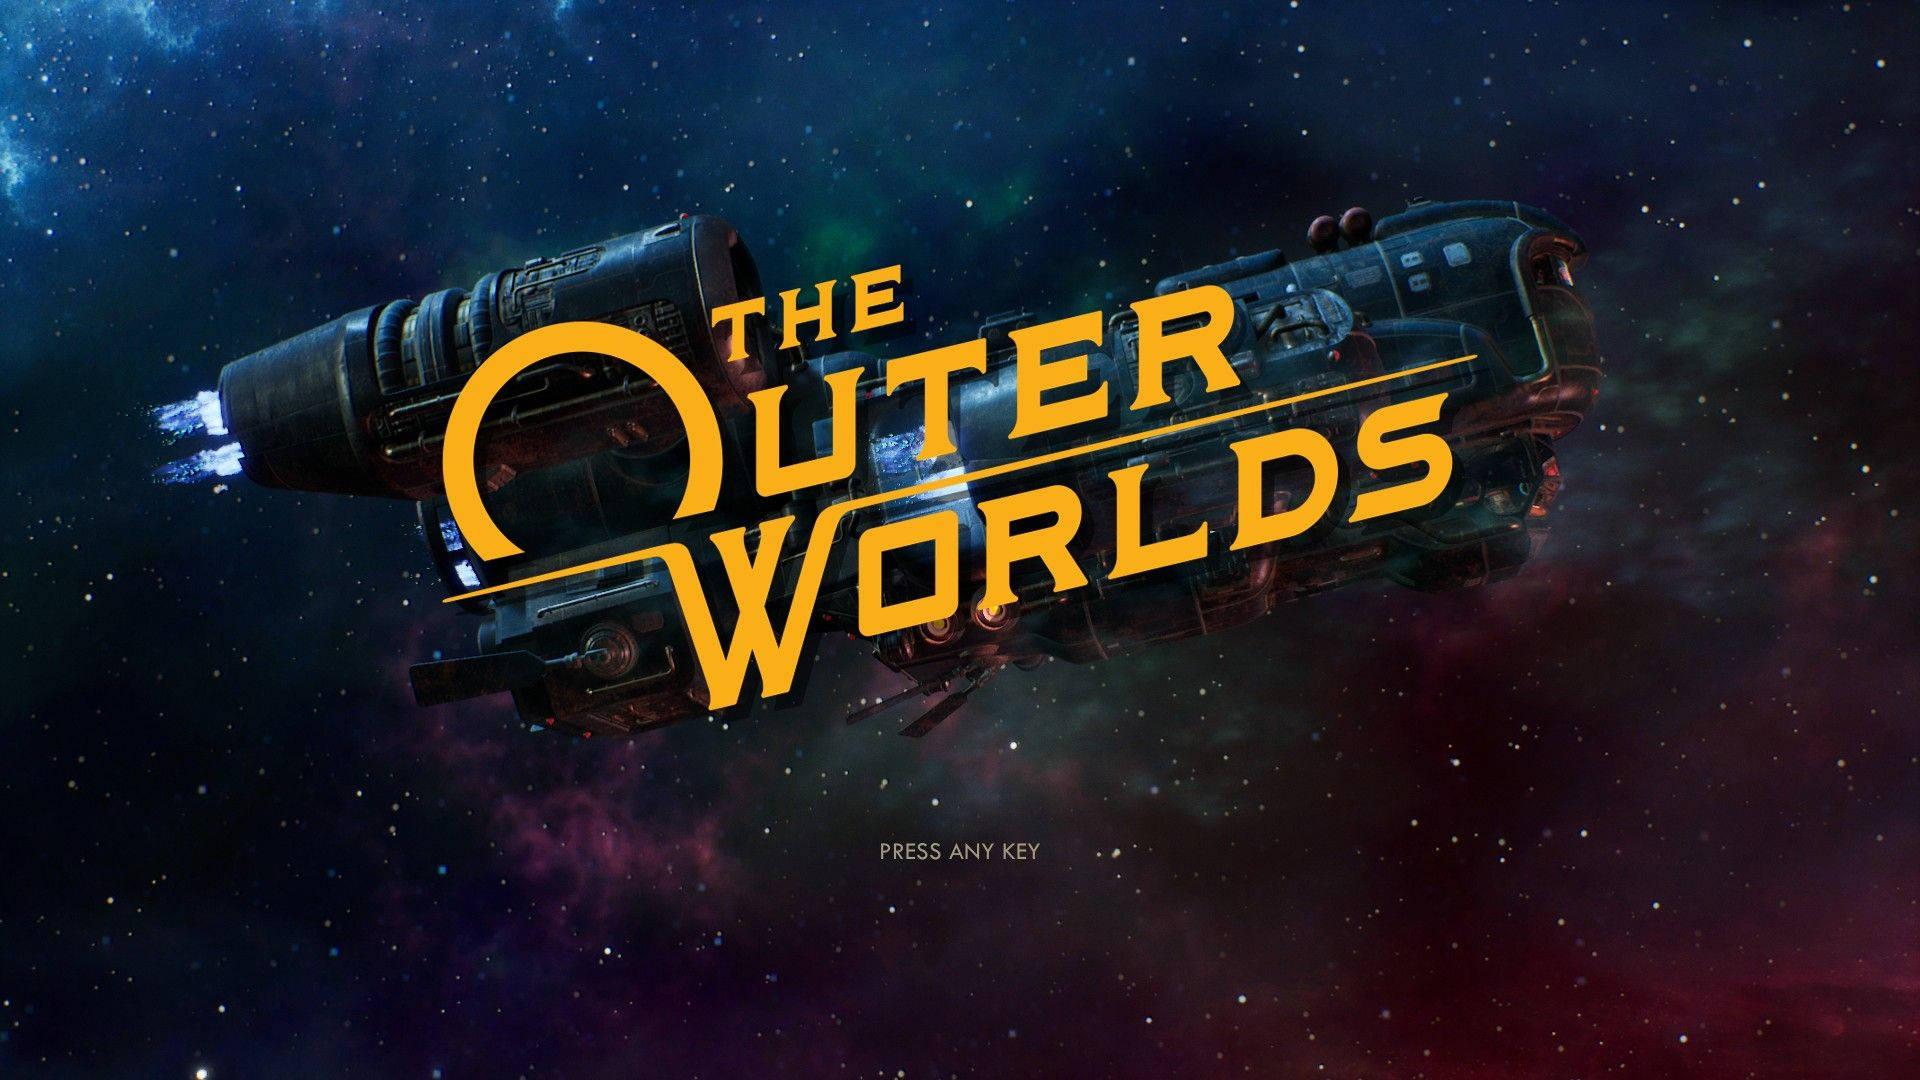 The Outer Worlds Spaceship Art Background